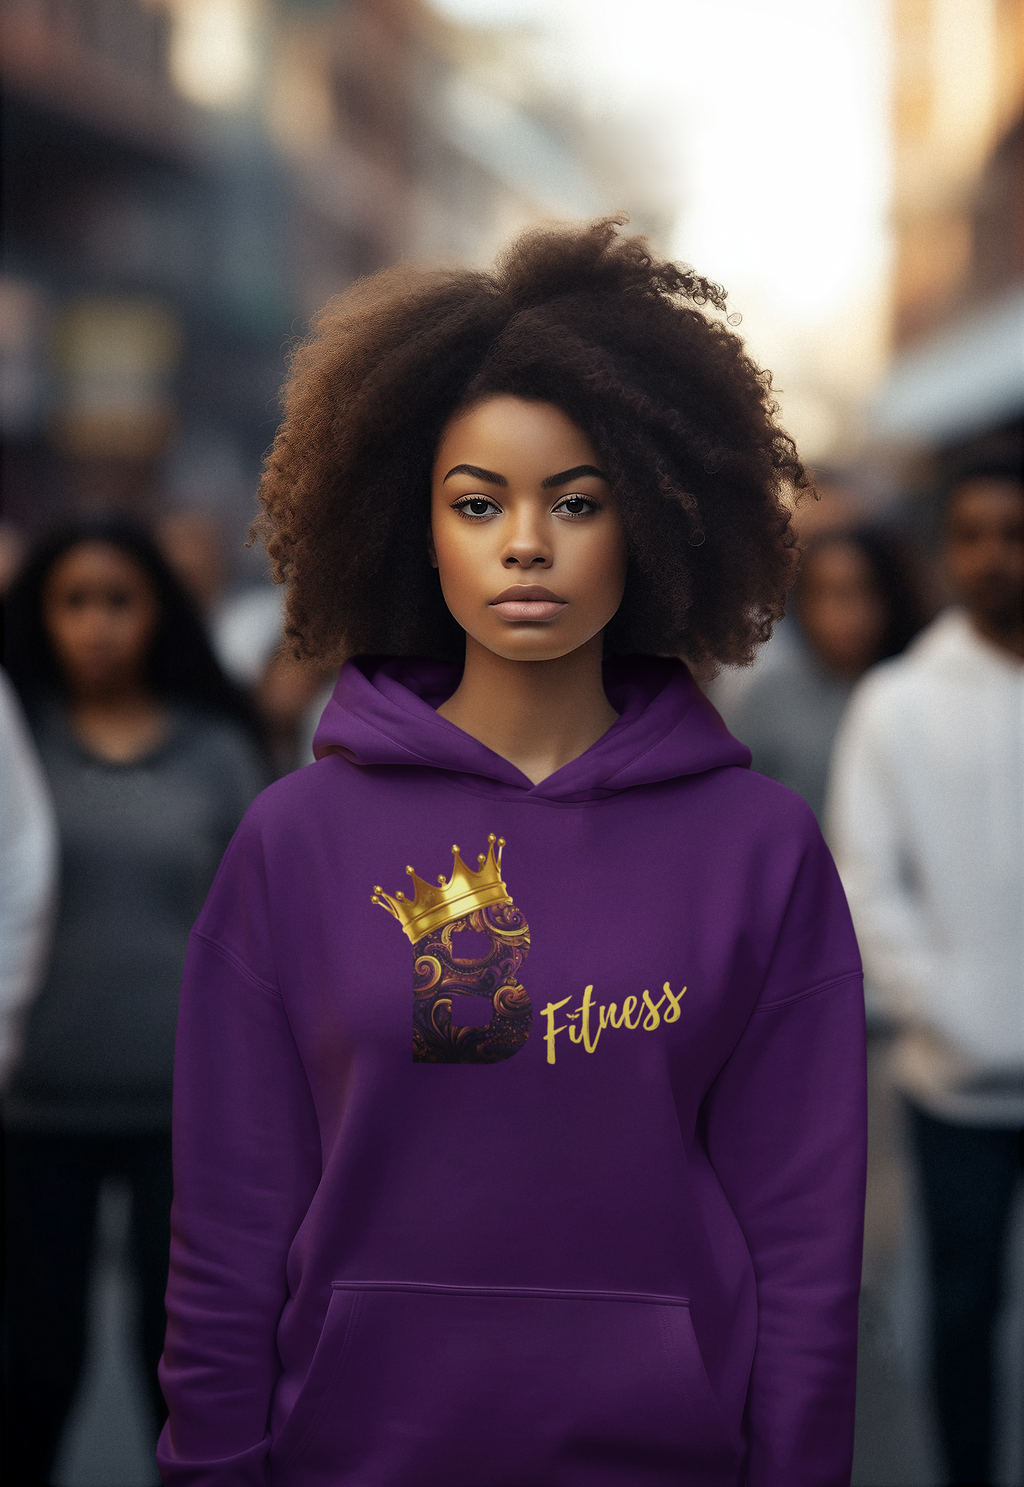 "B Fitness" - Special Edition (Purple) - Hoodie